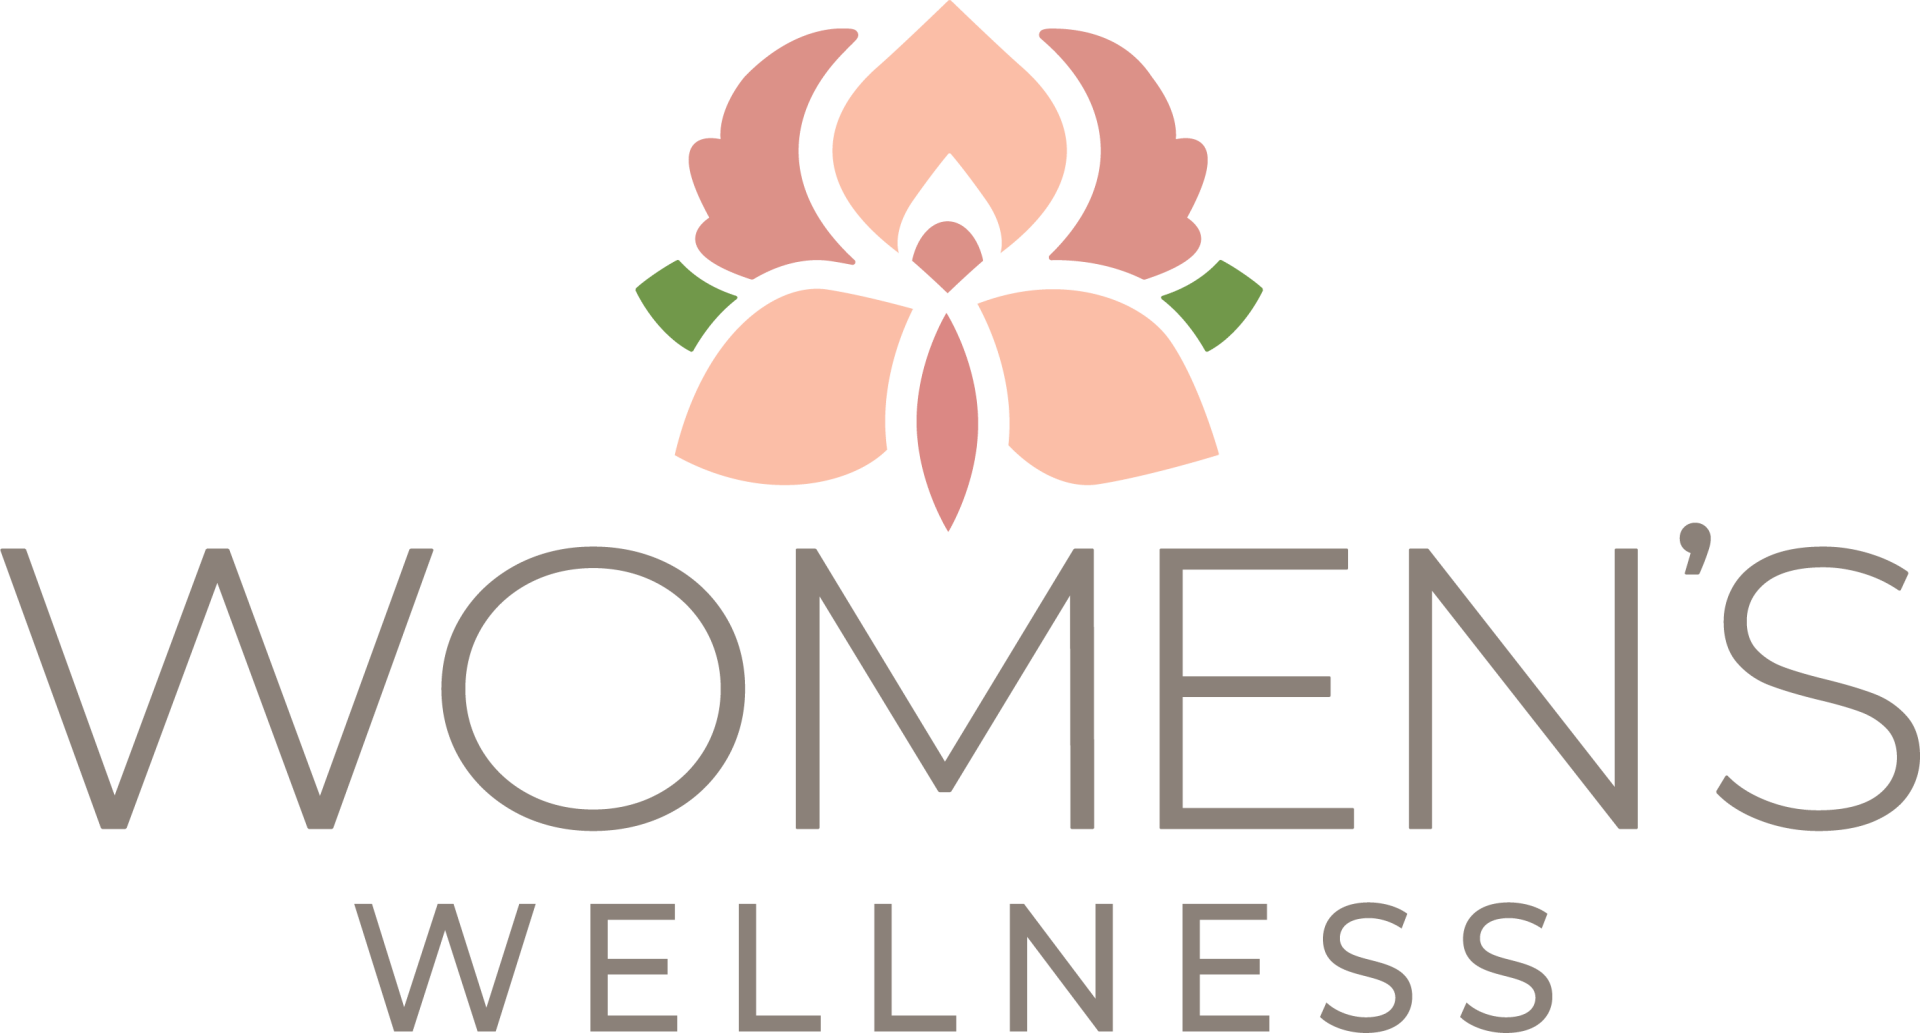 the logo for women 's wellness has a flower on it .